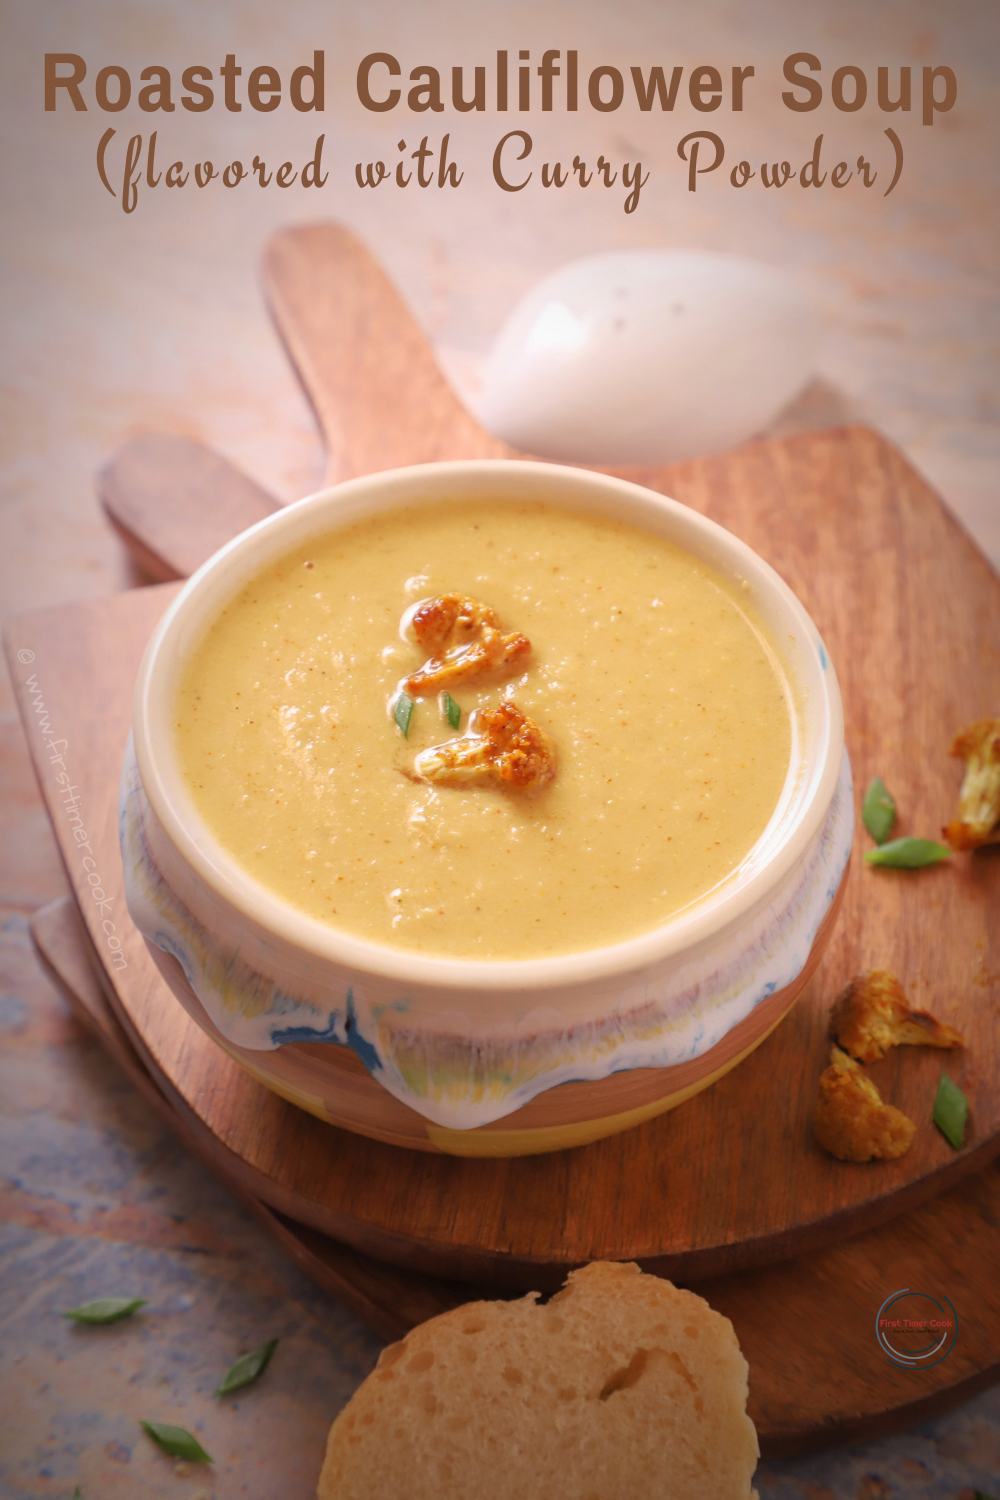 Roasted Cauliflower Soup flavored with Curry Powder